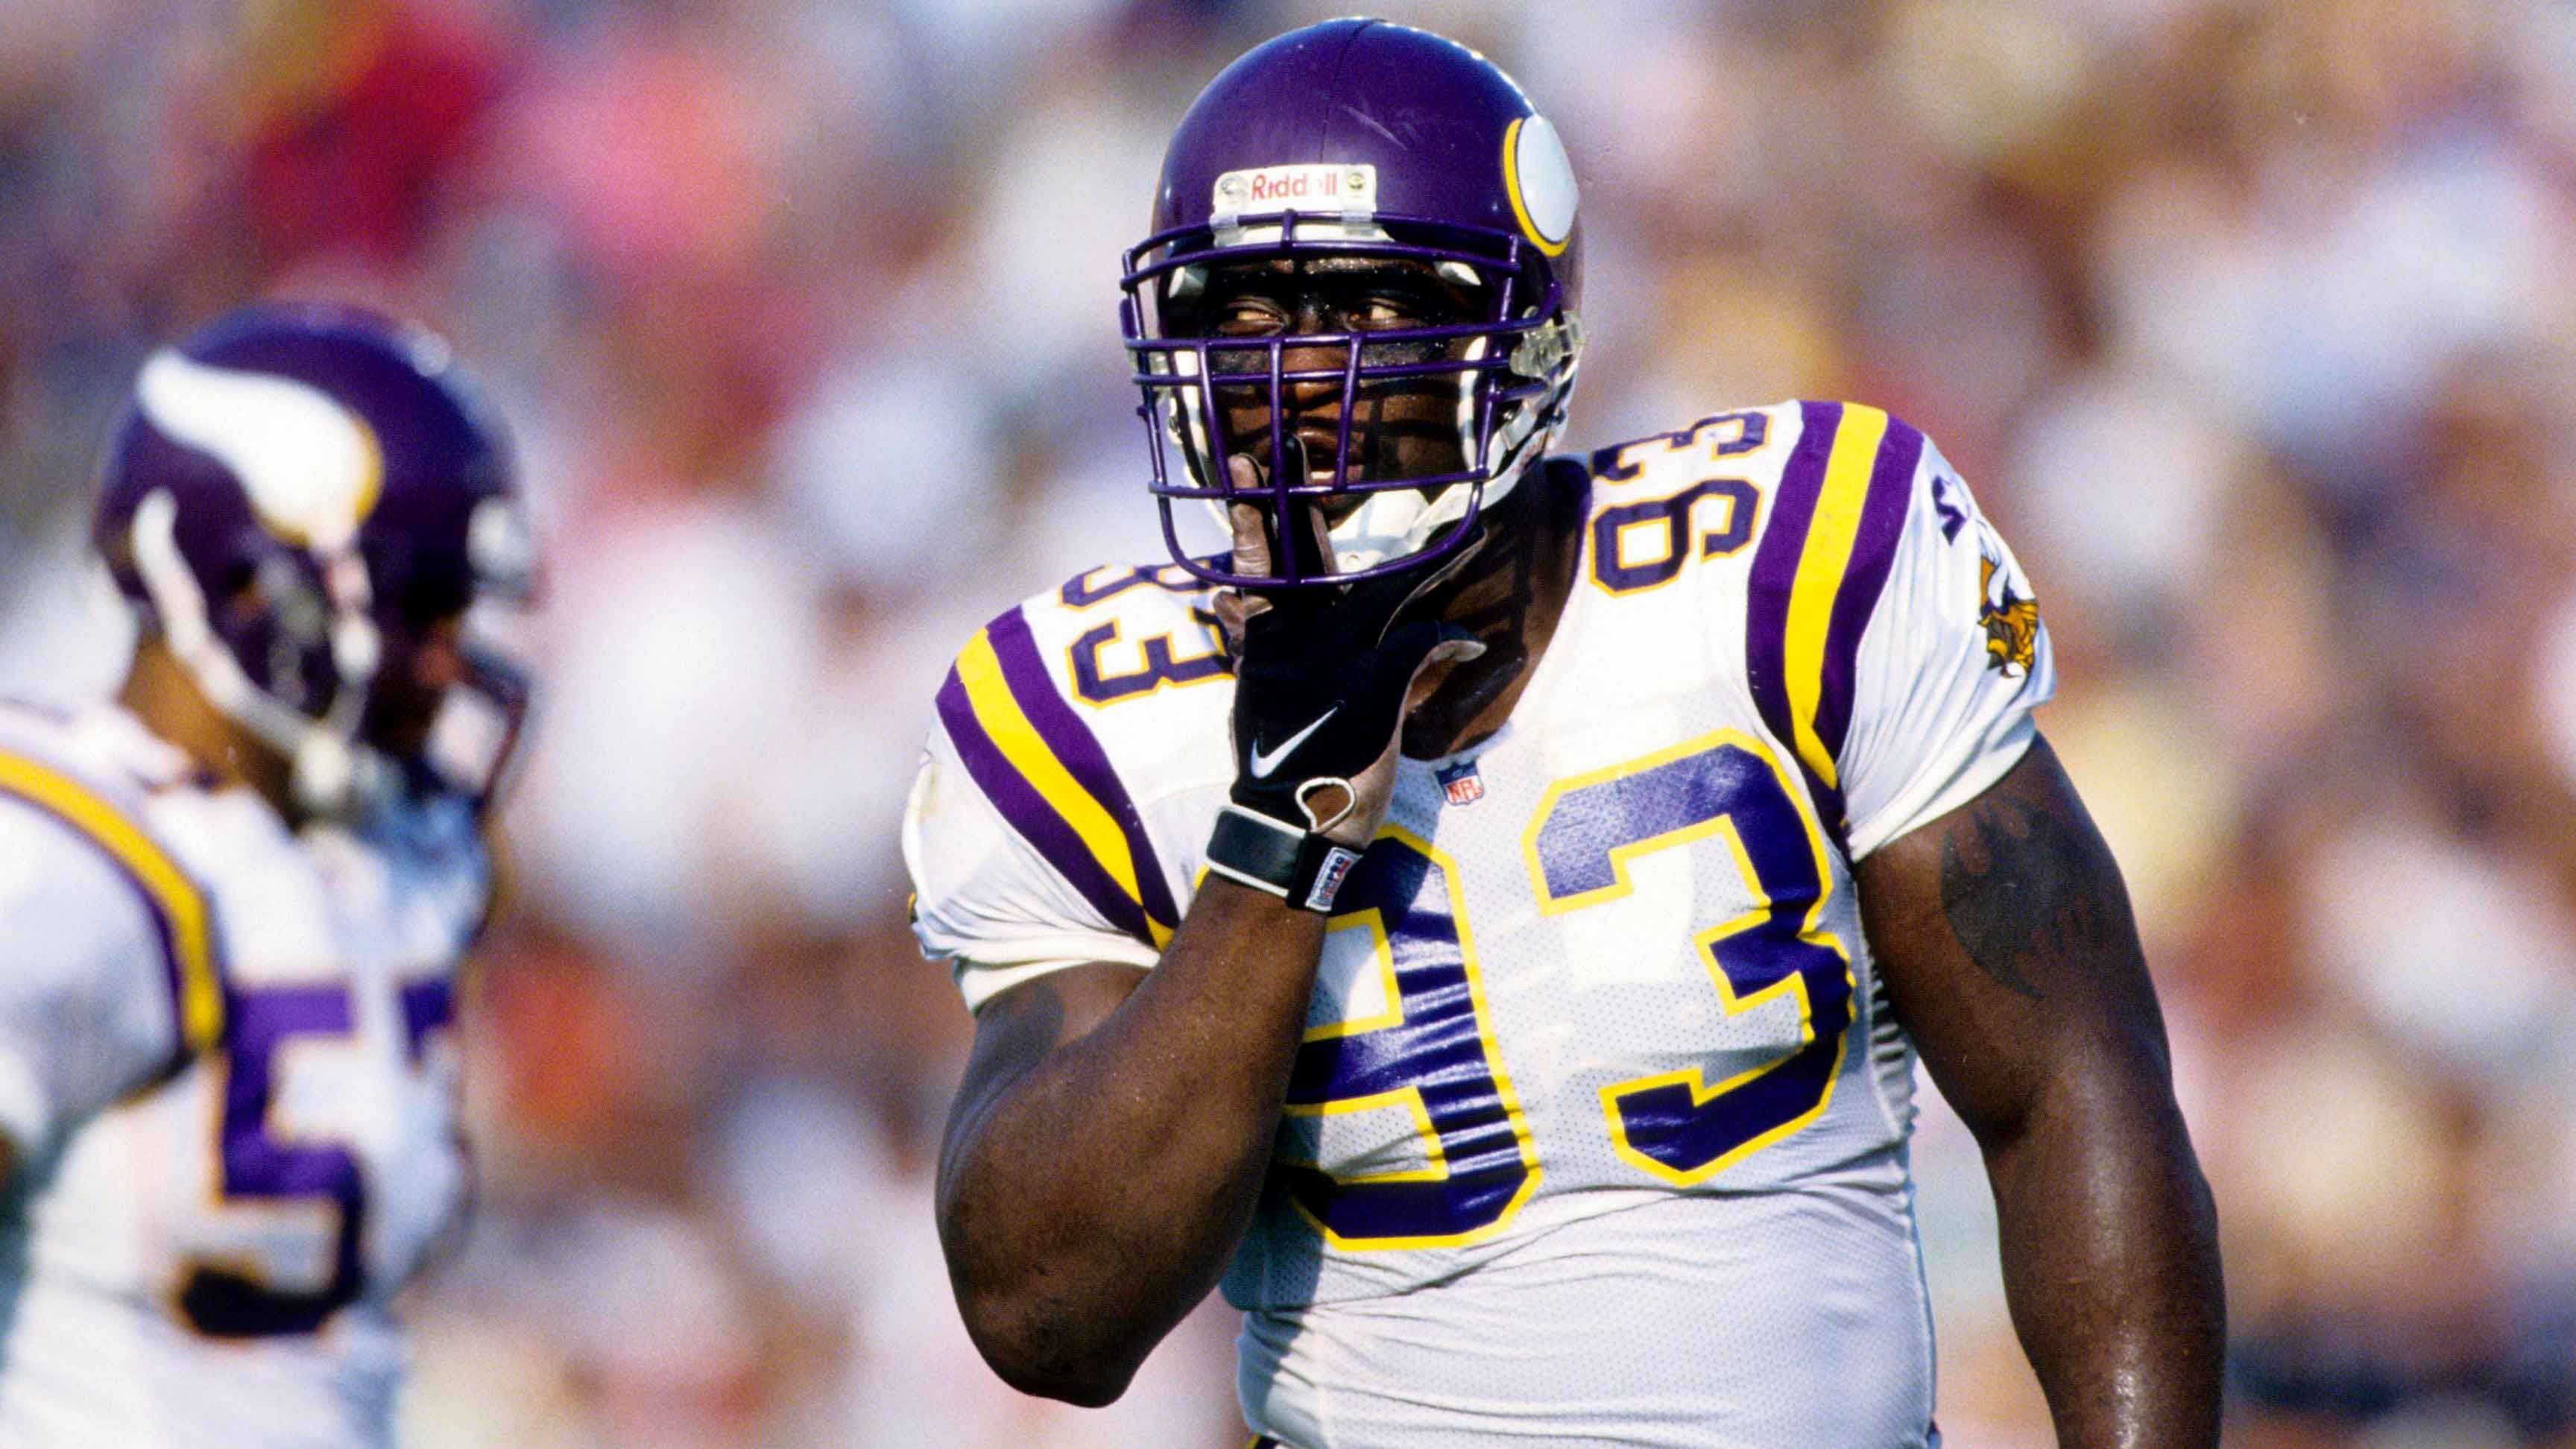 <strong>93: John Randle<br></strong>Teams: Minnesota Vikings, Seattle Seahawks<br>Position: Defensive End<br>Erfolge: Pro Football Hall of Famer, sechsmaliger First Team All-Pro, siebenmaliger Pro Bowler<br>Honorable Mention: Calais Campbell, Dwight Freeney
